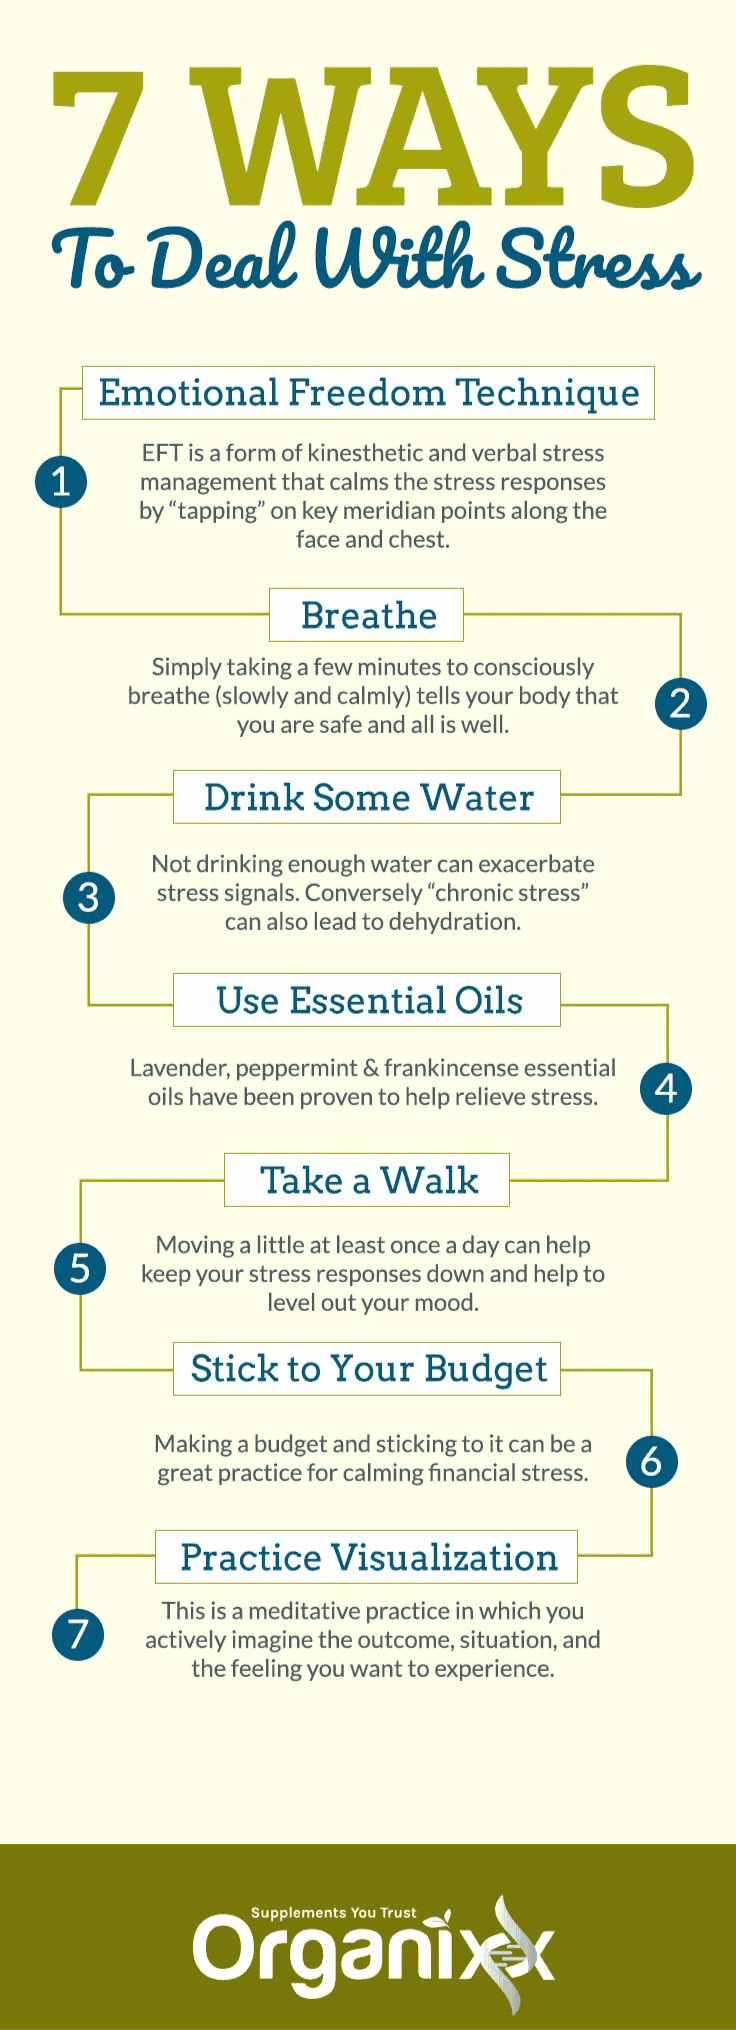 7 ways to deal with stress